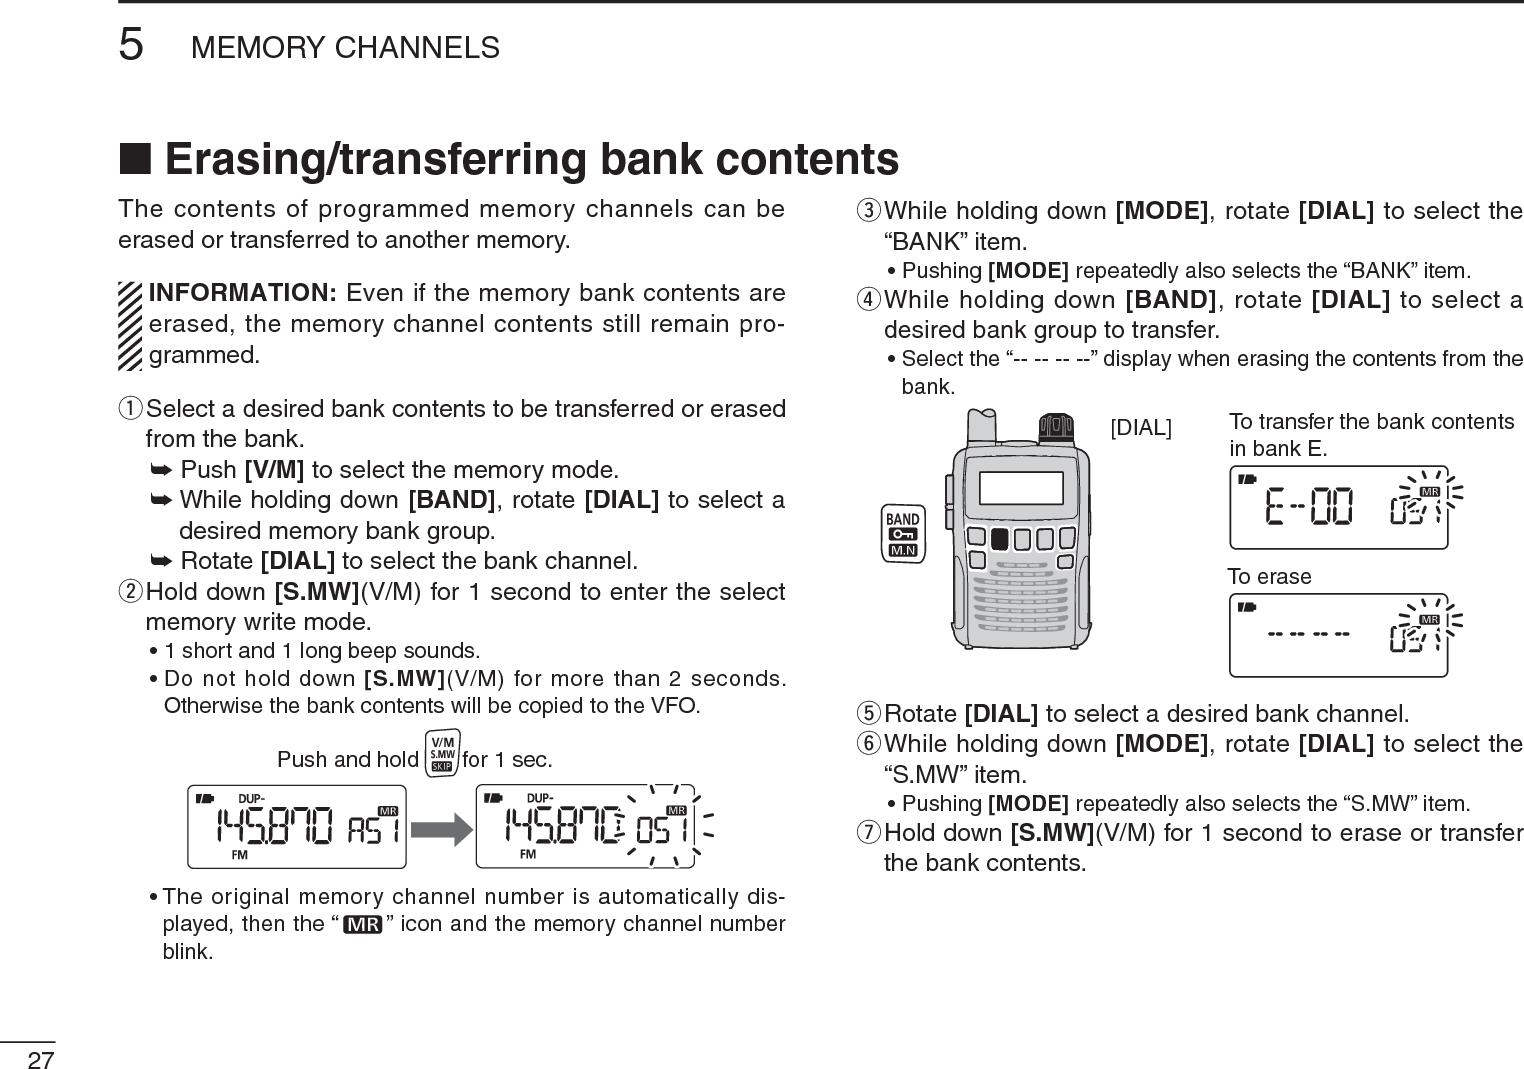 275MEMORY CHANNELSThe contents of programmed memory channels can be erased or transferred to another memory.INFORMATION: Even if the memory bank contents are erased, the memory channel contents still remain pro-grammed.q  Select a desired bank contents to be transferred or erased from the bank.± Push [V/M] to select the memory mode.±While holding down [BAND], rotate [DIAL] to select a desired memory bank group.± Rotate [DIAL] to select the bank channel.w  Hold down [S.MW](V/M) for 1 second to enter the select memory write mode.• 1 short and 1 long beep sounds.• Do not hold down [S.MW](V/M) for more than 2 seconds. Otherwise the bank contents will be copied to the VFO.Push and hold       for 1 sec.• The original memory channel number is automatically dis-played, then the “ ” icon and the memory channel number blink.e  While holding down [MODE], rotate [DIAL] to select the “BANK” item.• Pushing [MODE] repeatedly also selects the “BANK” item.r  While holding down [BAND], rotate [DIAL] to select a desired bank group to transfer.• Select the “-- -- -- --” display when erasing the contents from the bank.[DIAL] To transfer the bank contentsin bank E.To erasetRotate [DIAL] to select a desired bank channel.y  While holding down [MODE], rotate [DIAL] to select the “S.MW” item.• Pushing [MODE] repeatedly also selects the “S.MW” item.u  Hold down [S.MW](V/M) for 1 second to erase or transfer the bank contents.N Erasing/transferring bank contents